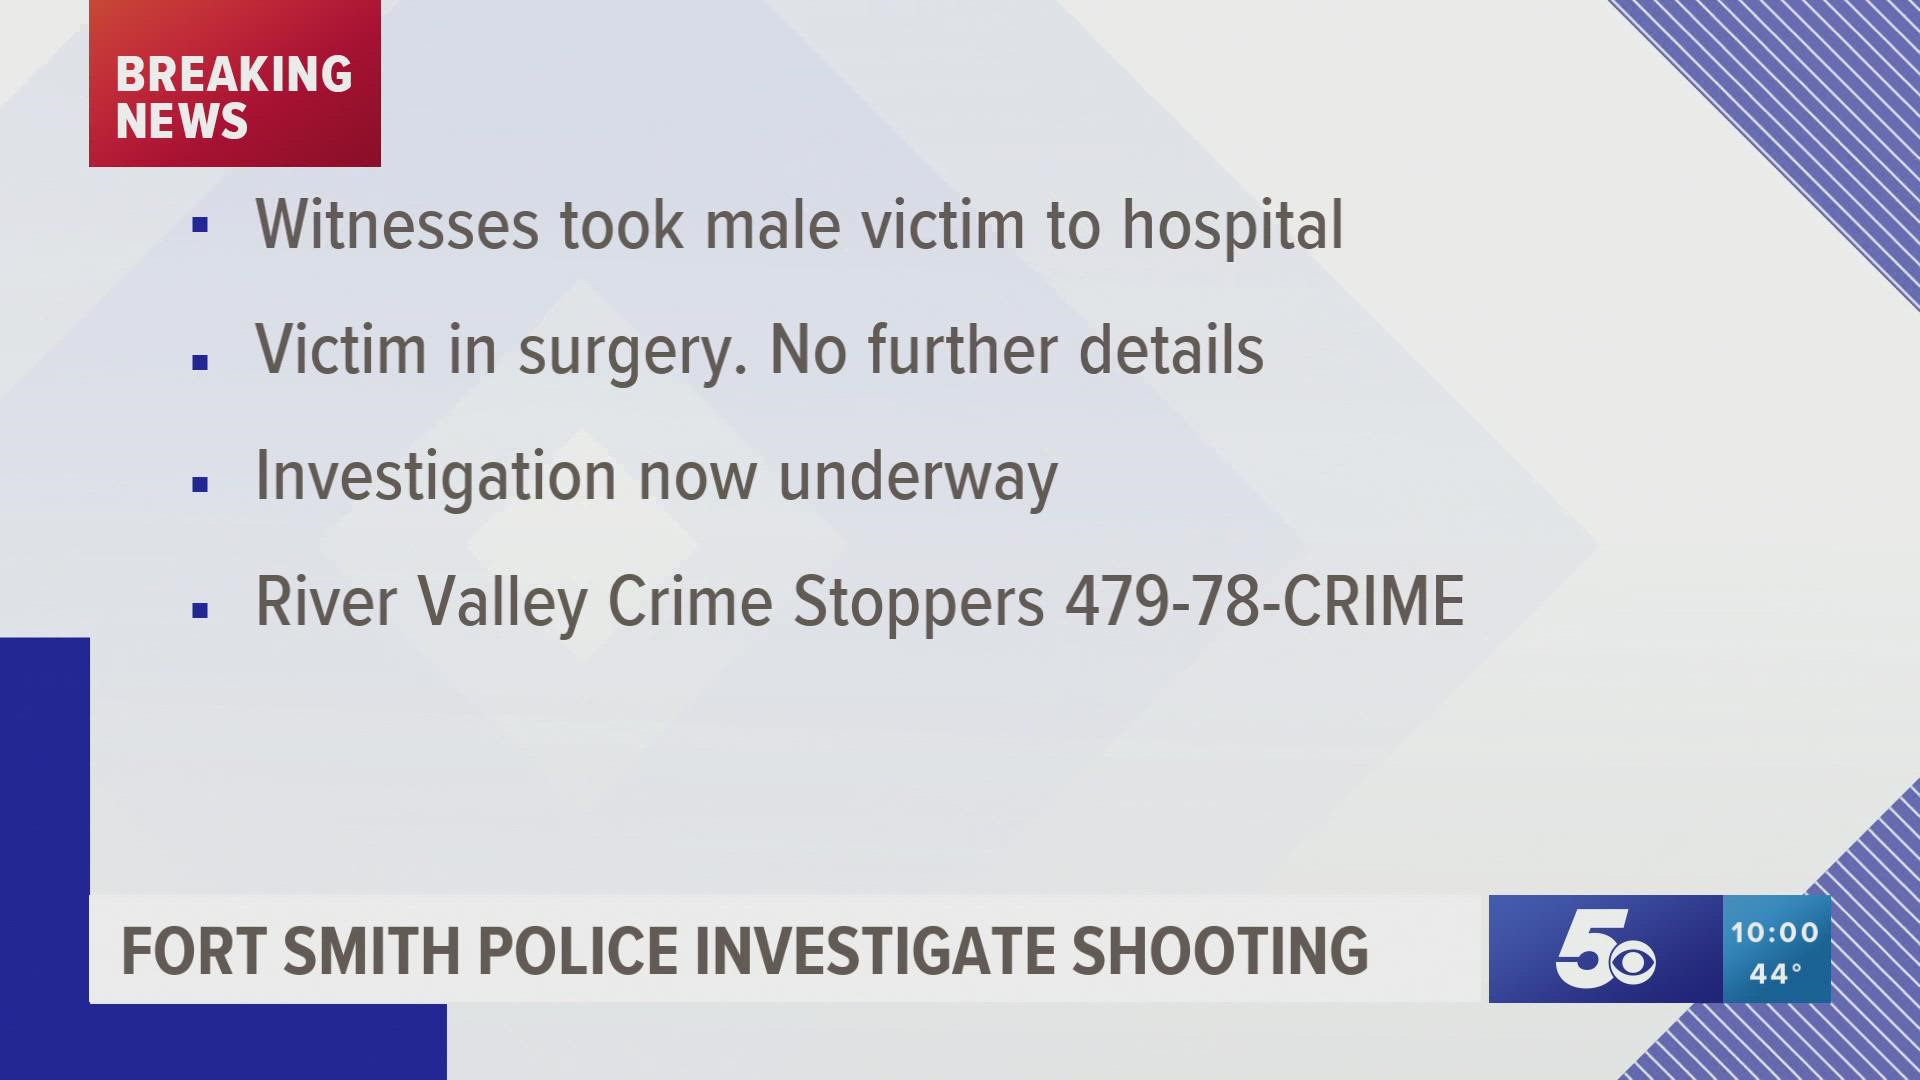 If you have any information about this shooting, call River Valley Crime Stoppers at (479) 78-CRIME.